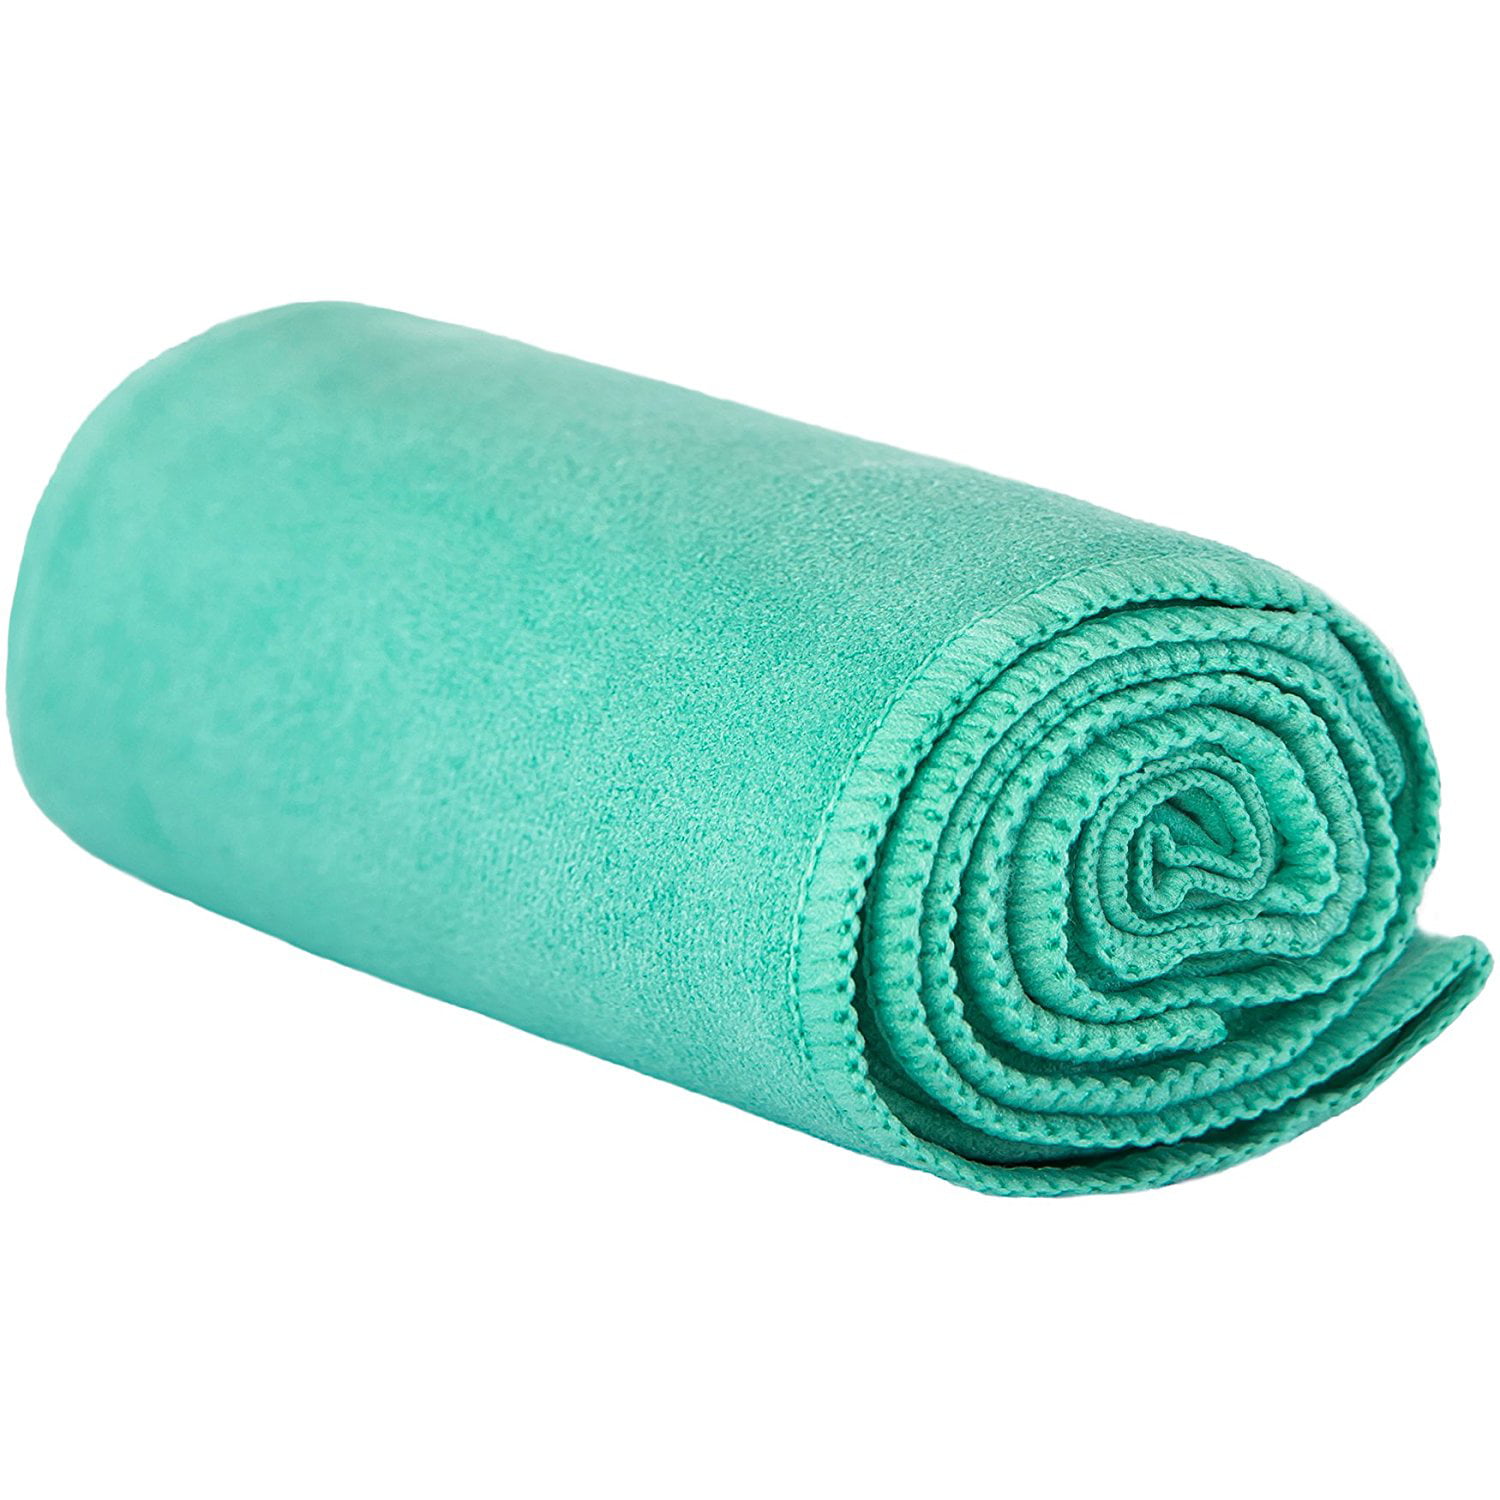 for Bikram Pilates and Yoga Mats. SHANDALI GoSweat Non-Slip Hot Yoga Towel with Super-Absorbent Soft Suede Microfiber in Many Colors